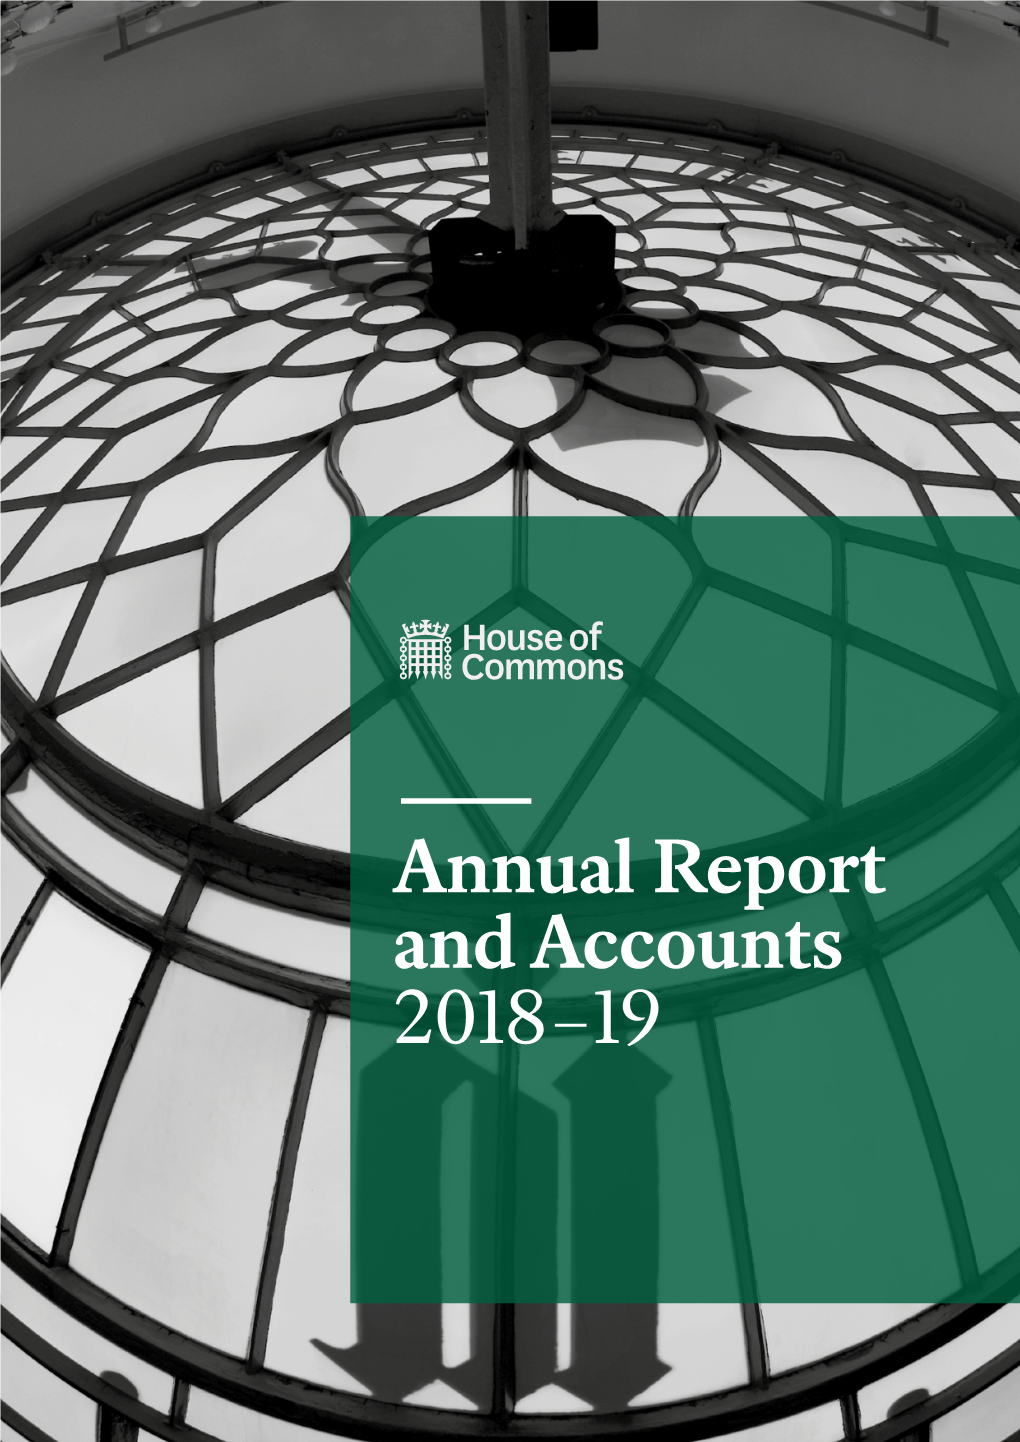 House of Commons Annual Report and Accounts 2018-19